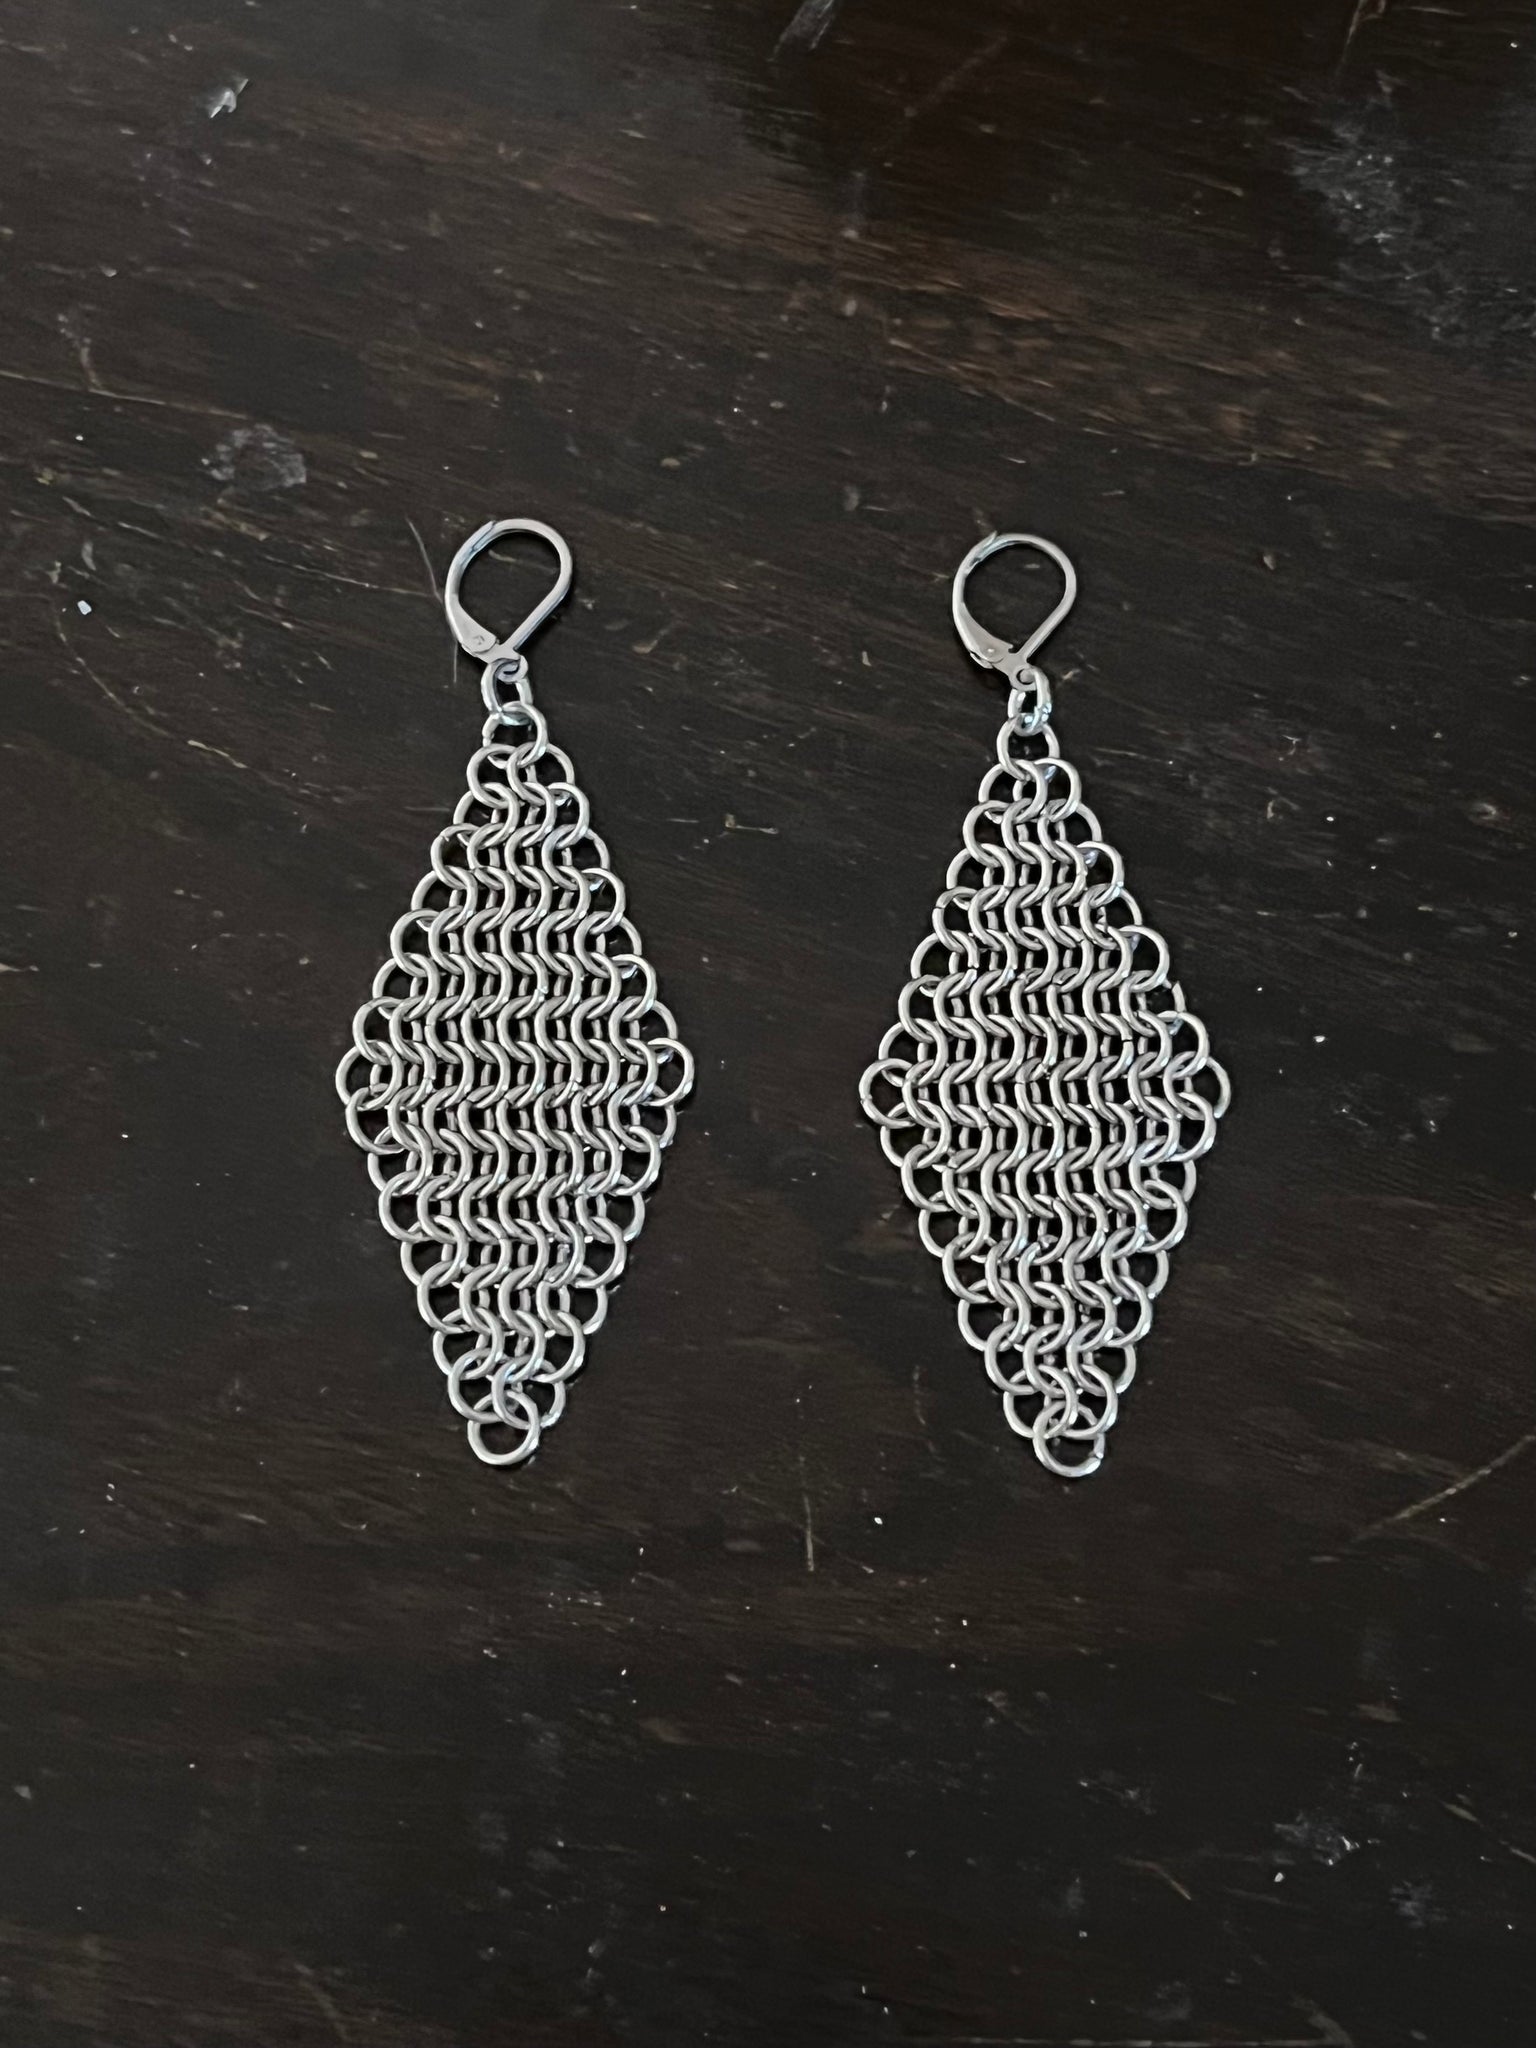 The “CHAINMAIL” earrings